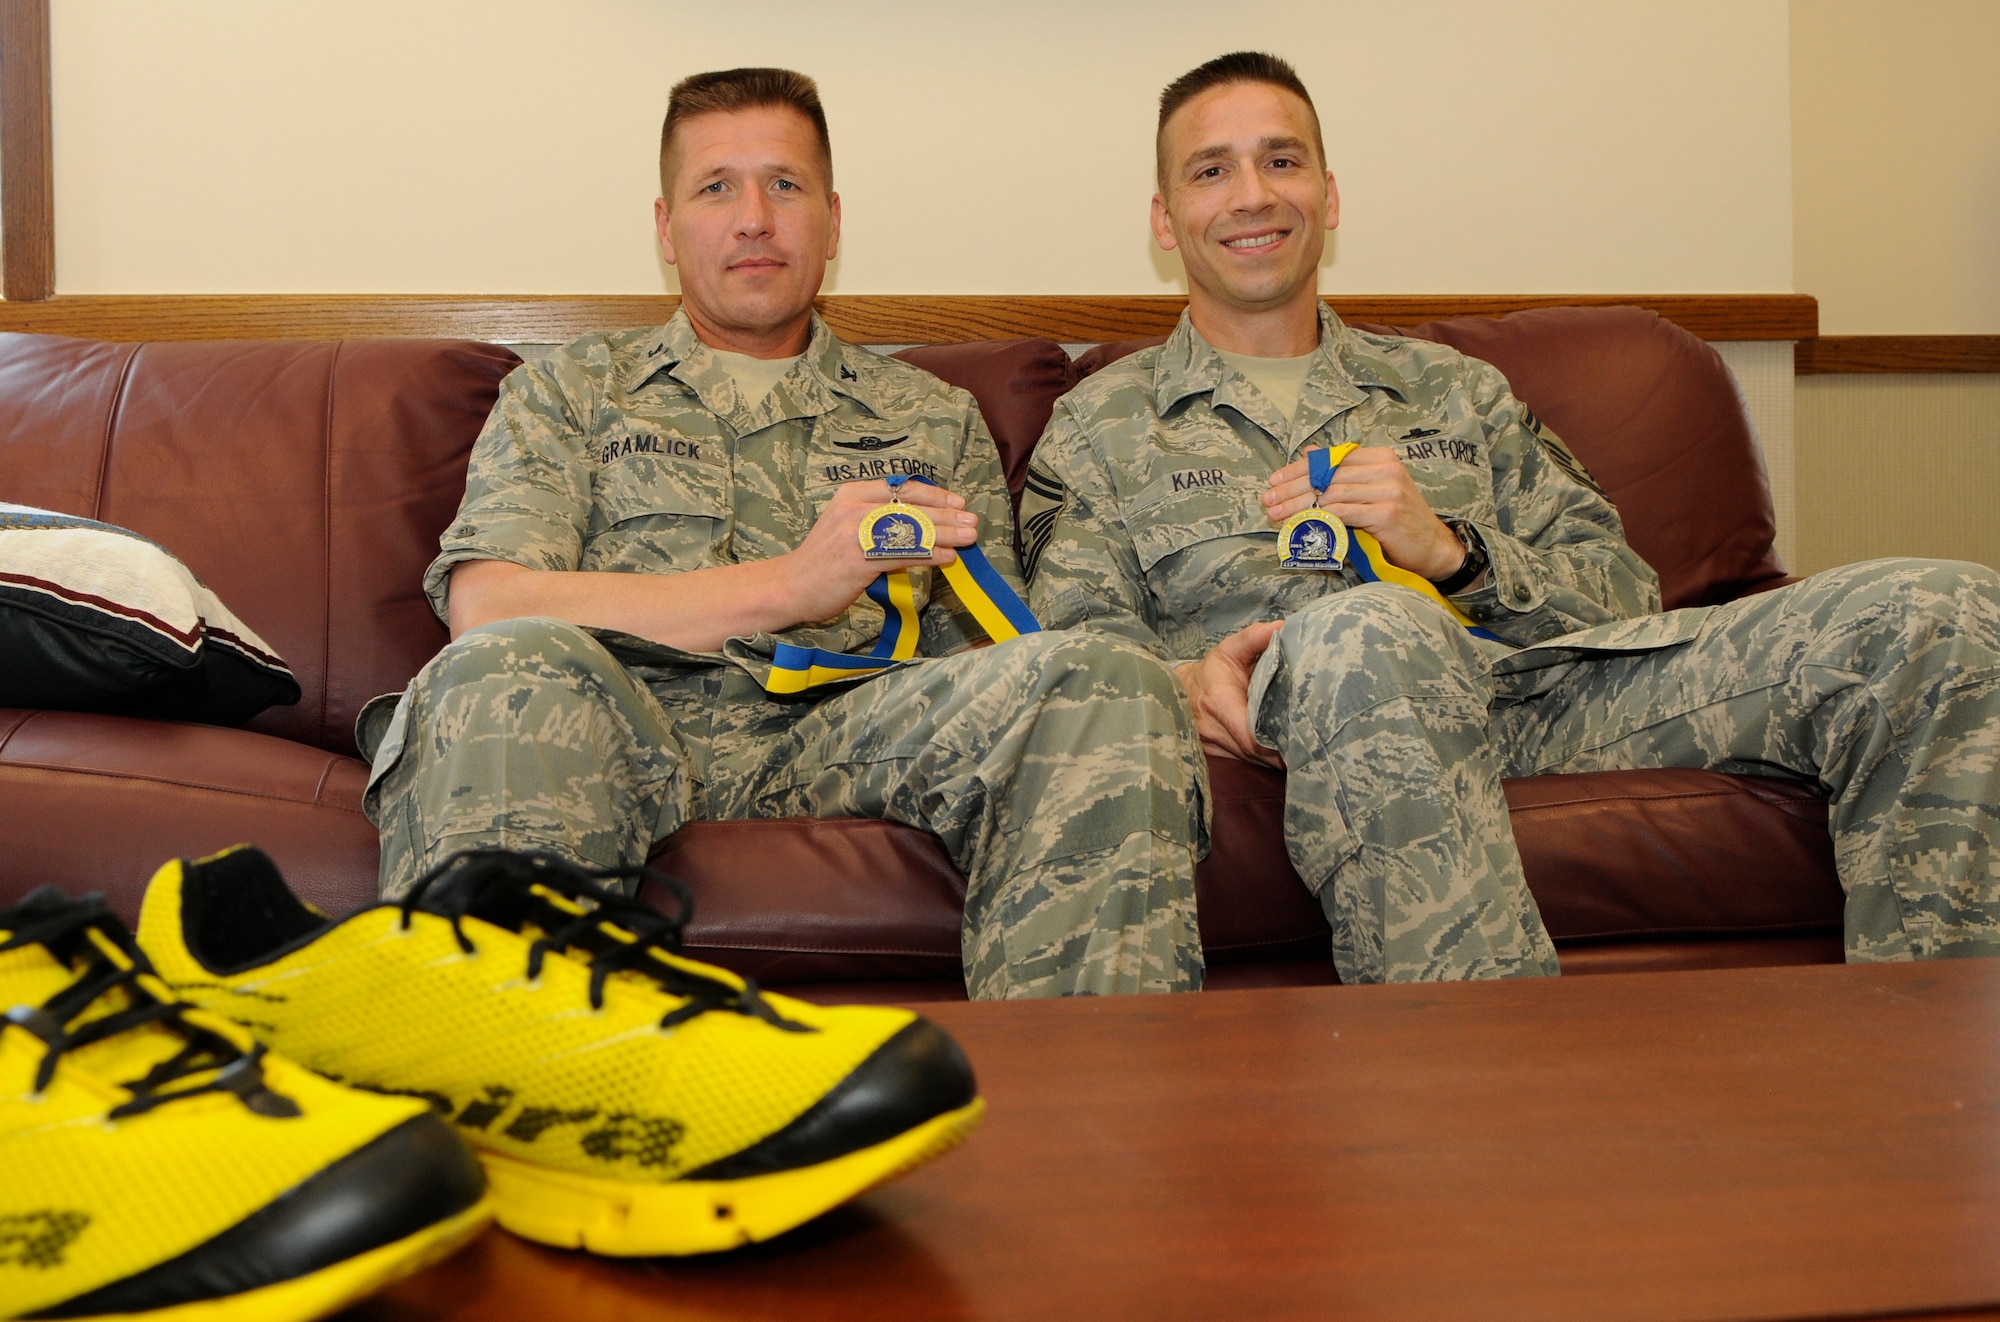 Col. Carl Gramlick, 11th Wing vice commander, and Senior Master Sgt. Andre Karr, 11th Comptrollers Squadron superintendent, show medals April 24 that they received from running the Boston Marathon. Over 23,000 participants ran the marathon and over 500,000 spectators watched it in person. (U.S. Air Force photo by Senior Airman Tim Chacon) 